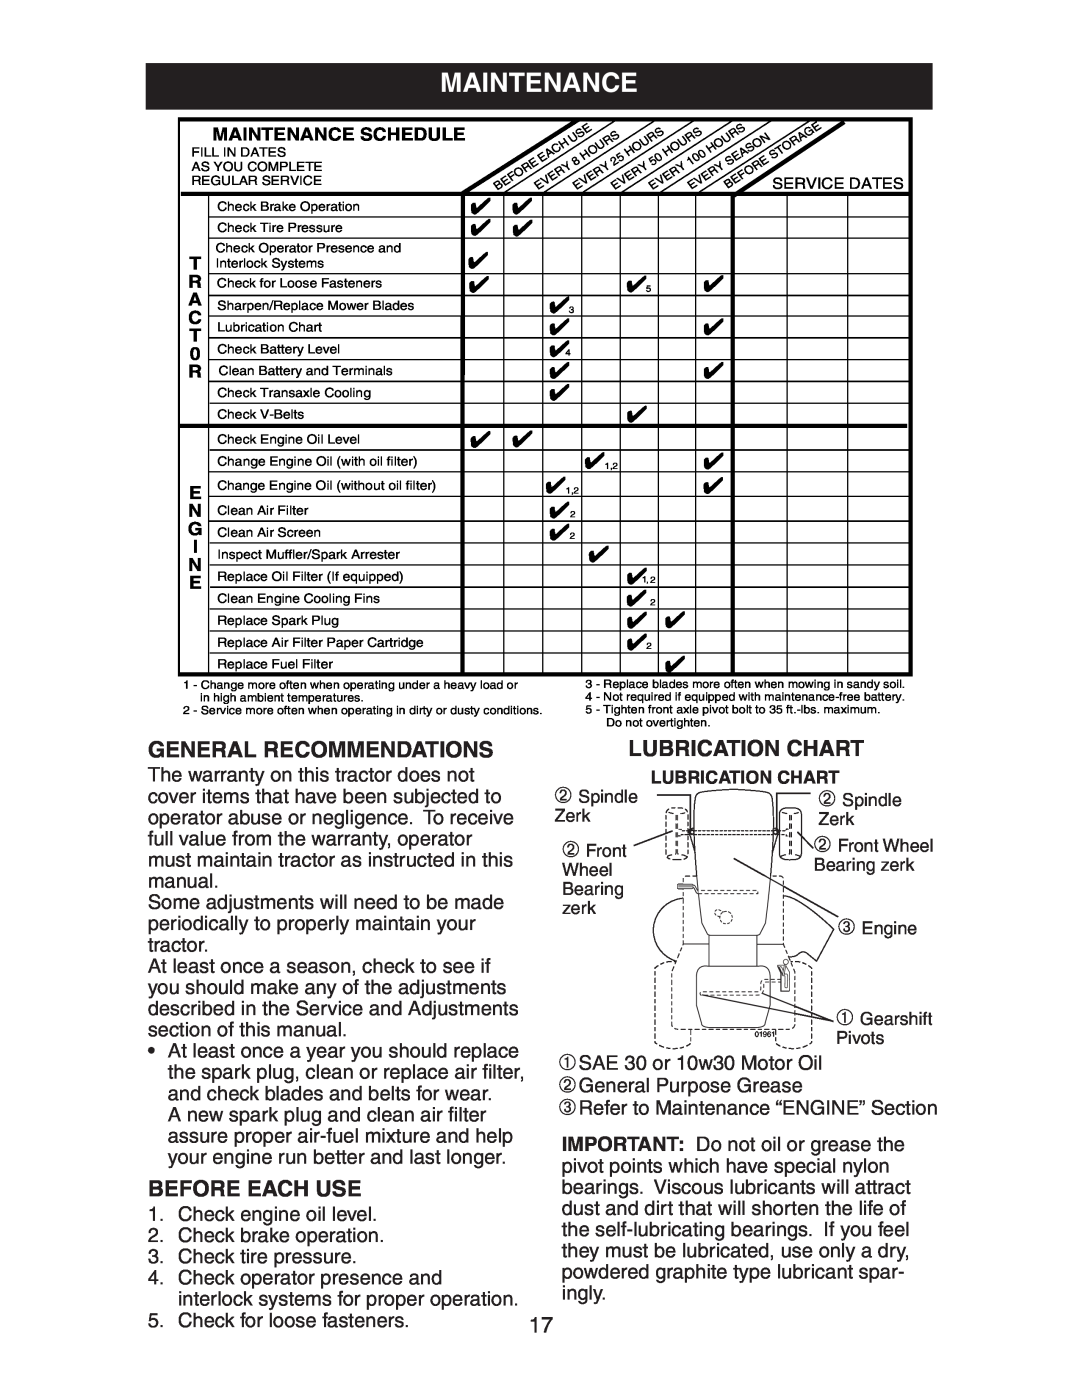 Electrolux AG17542STA manual General Recommendations, Lubrication Chart, Before Each Use, Maintenance Schedule 